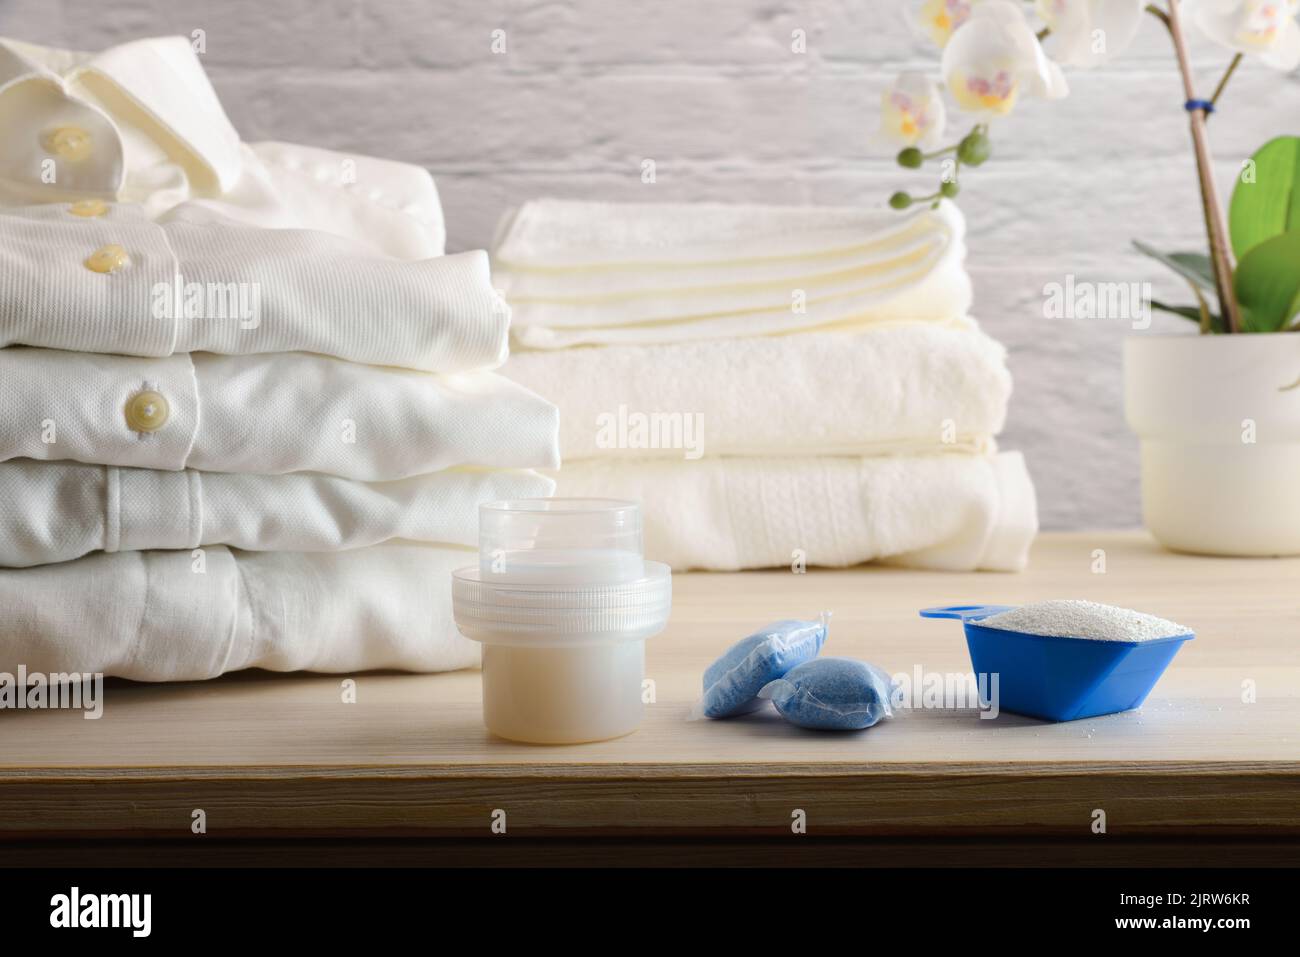 Different types of laundry detergents on wooden table with freshly washed folded white clothes. Front view. Horizontal composition. Stock Photo